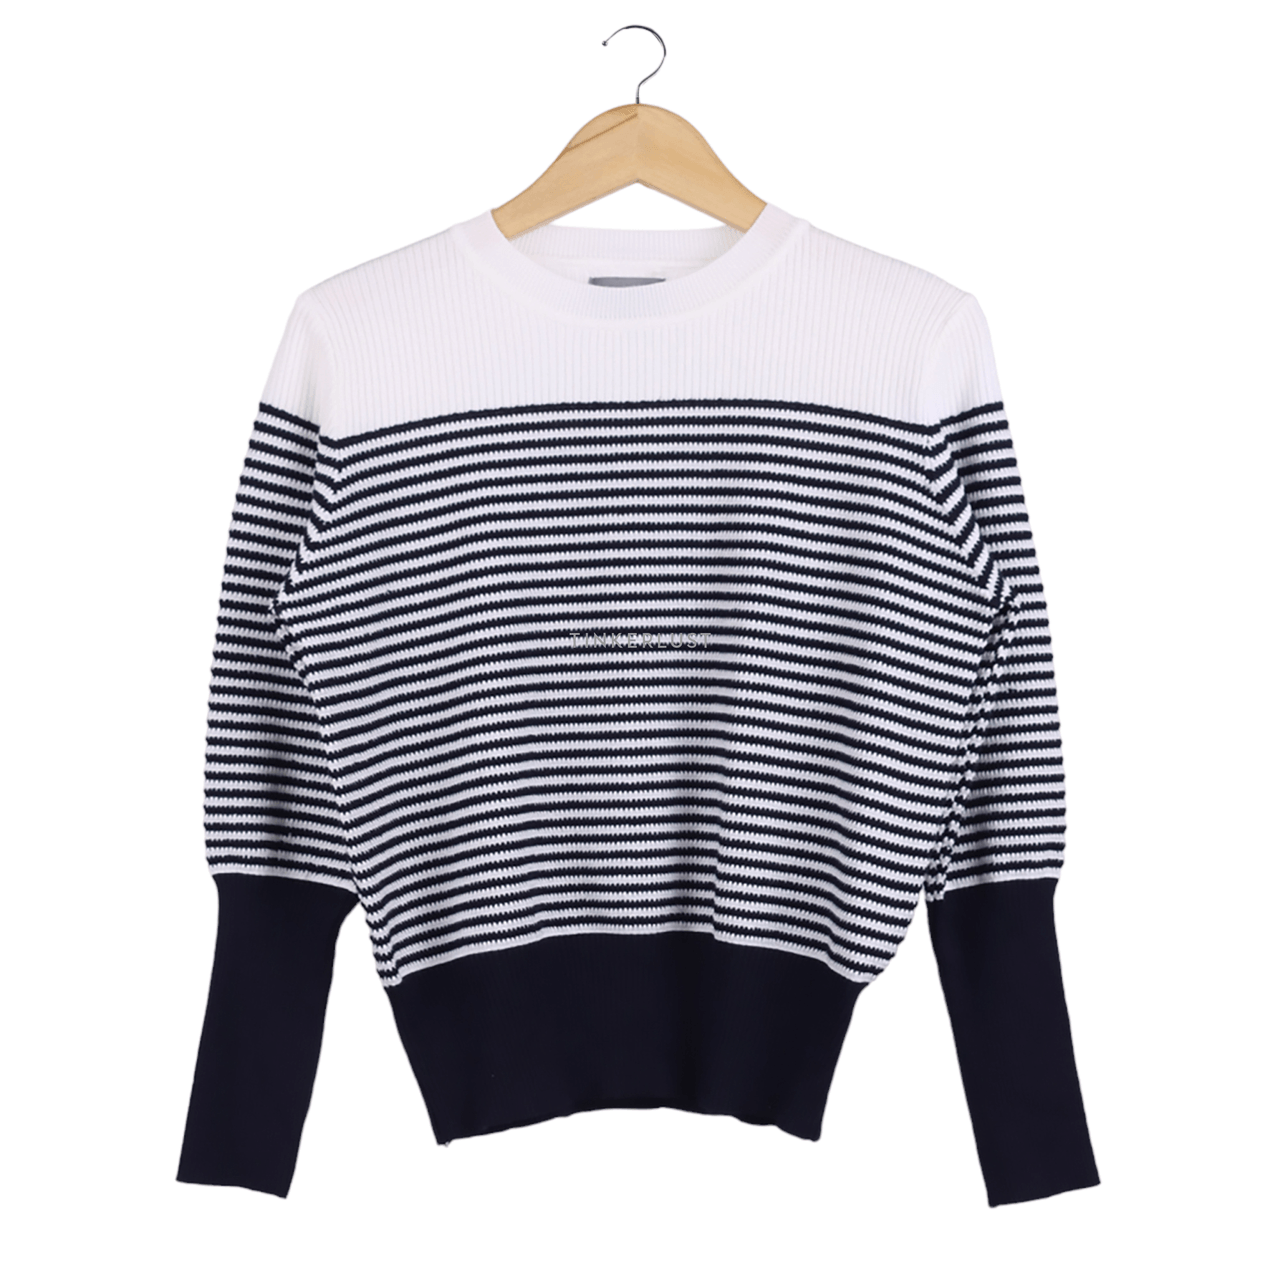 This is April Navy & White Stripes Sweater